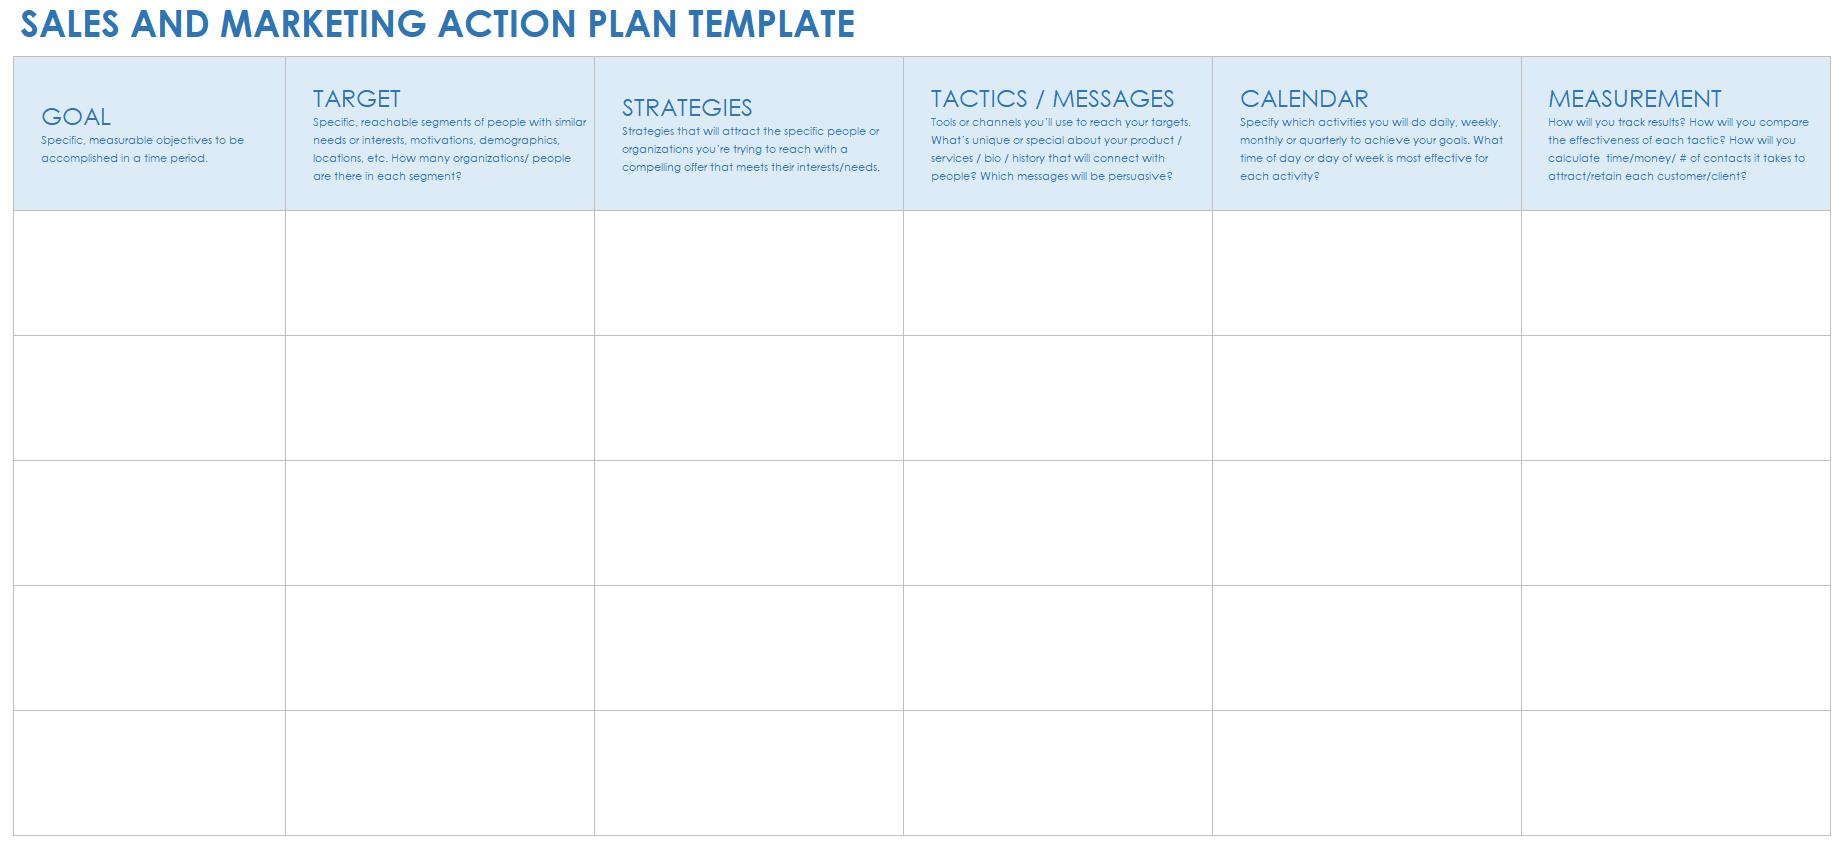 Sales and Marketing Action Plan Template